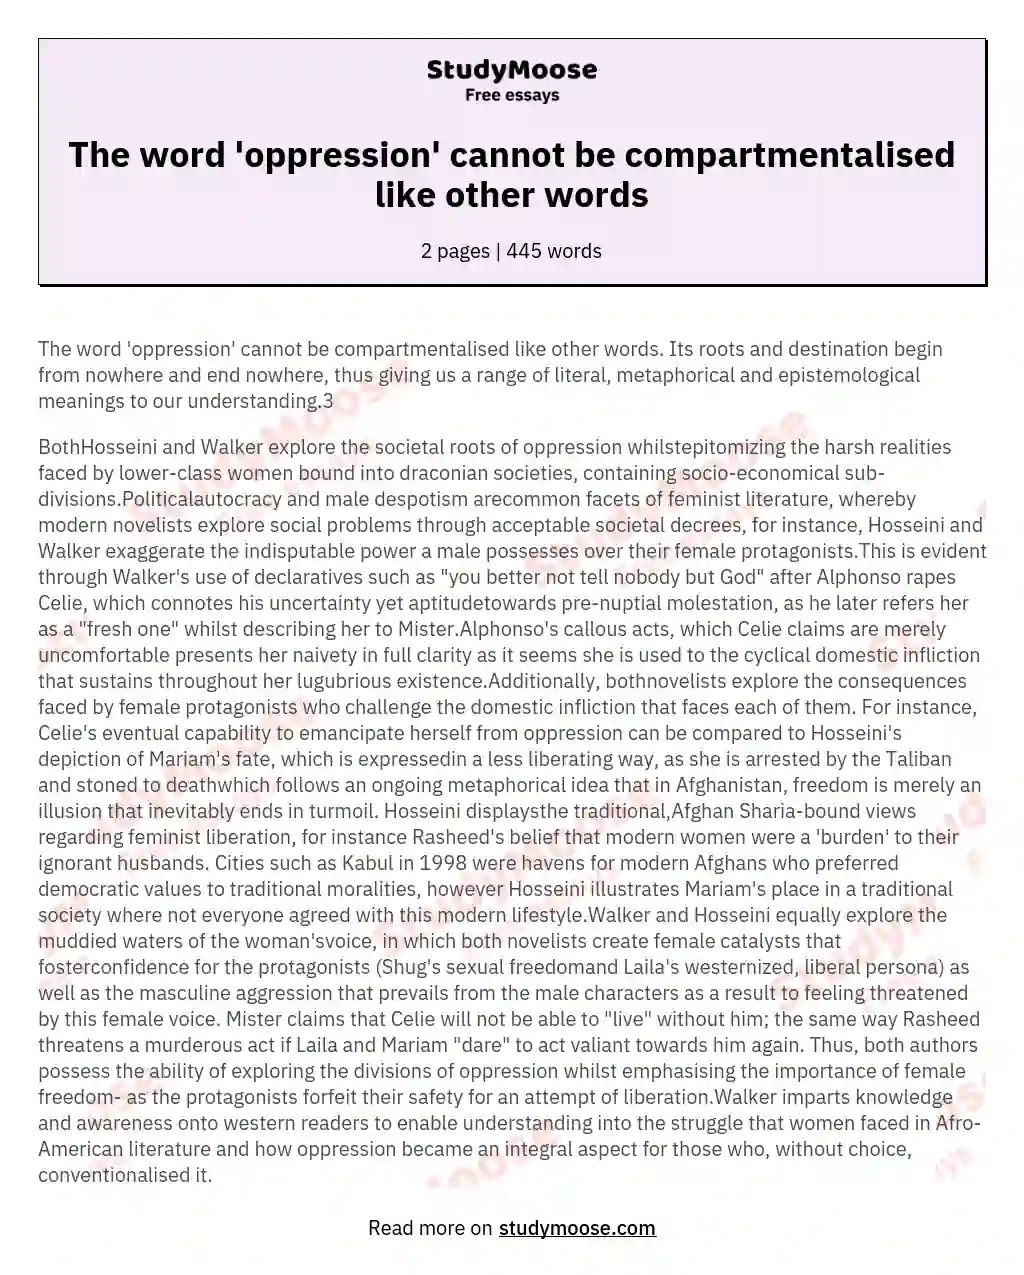 The word 'oppression' cannot be compartmentalised like other words essay